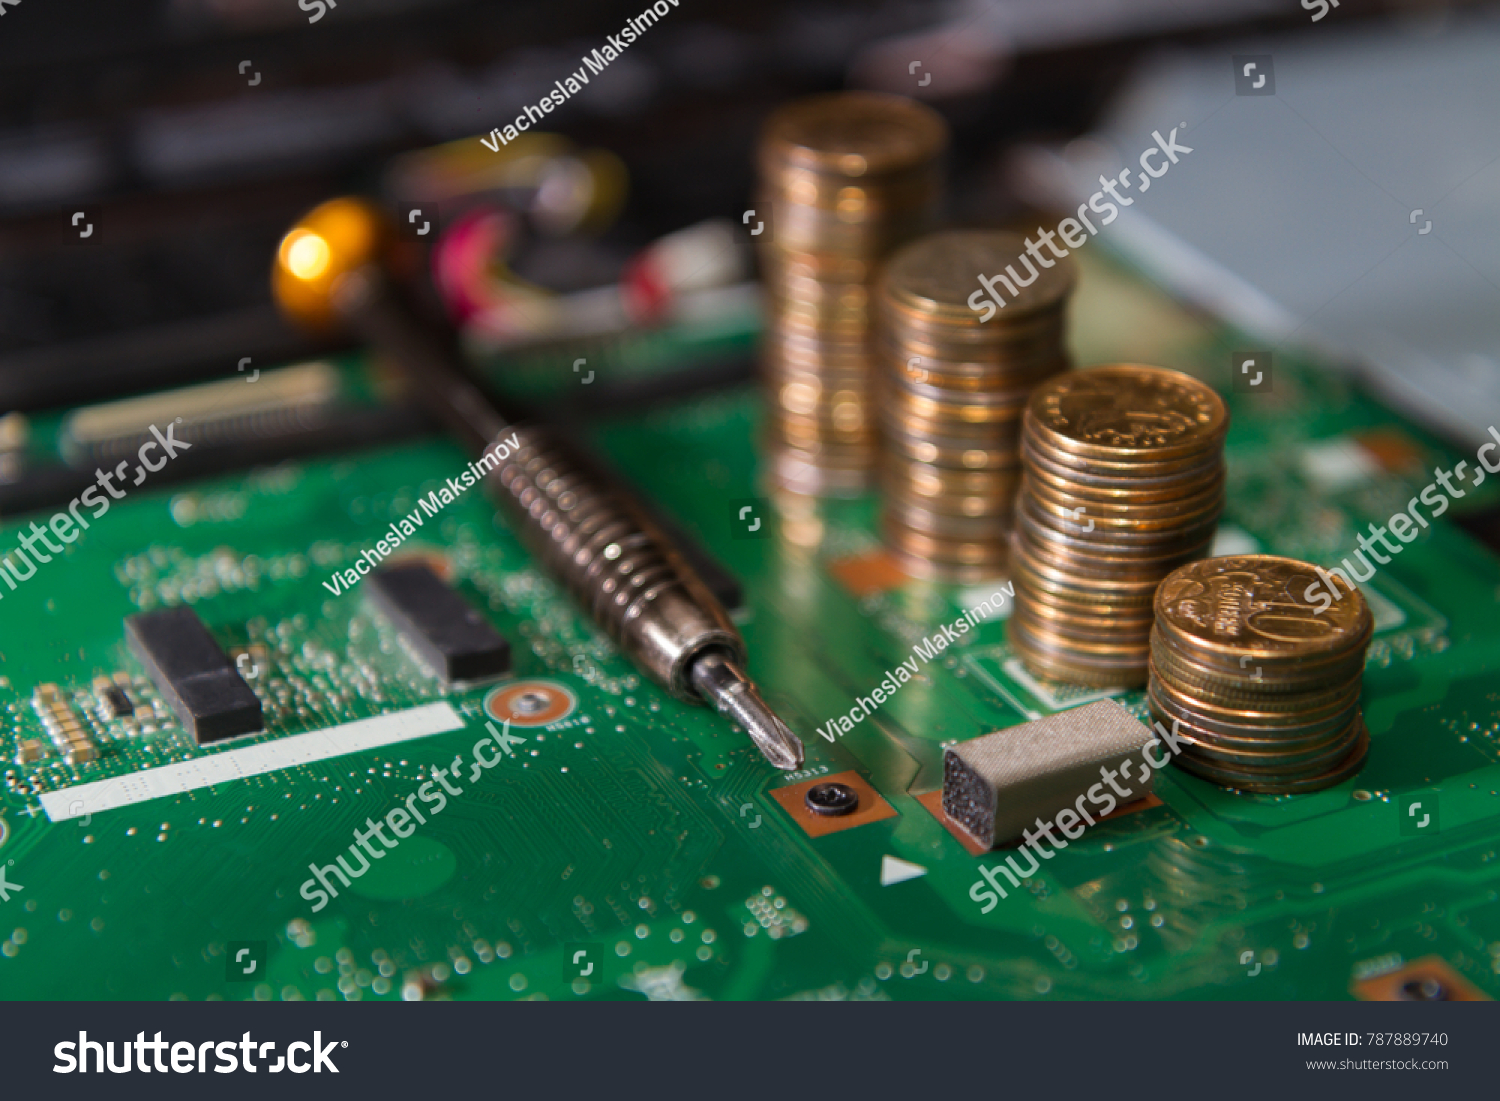 circuit board green with tools and coins closeup. business concept component repair laptop screwdriver #787889740